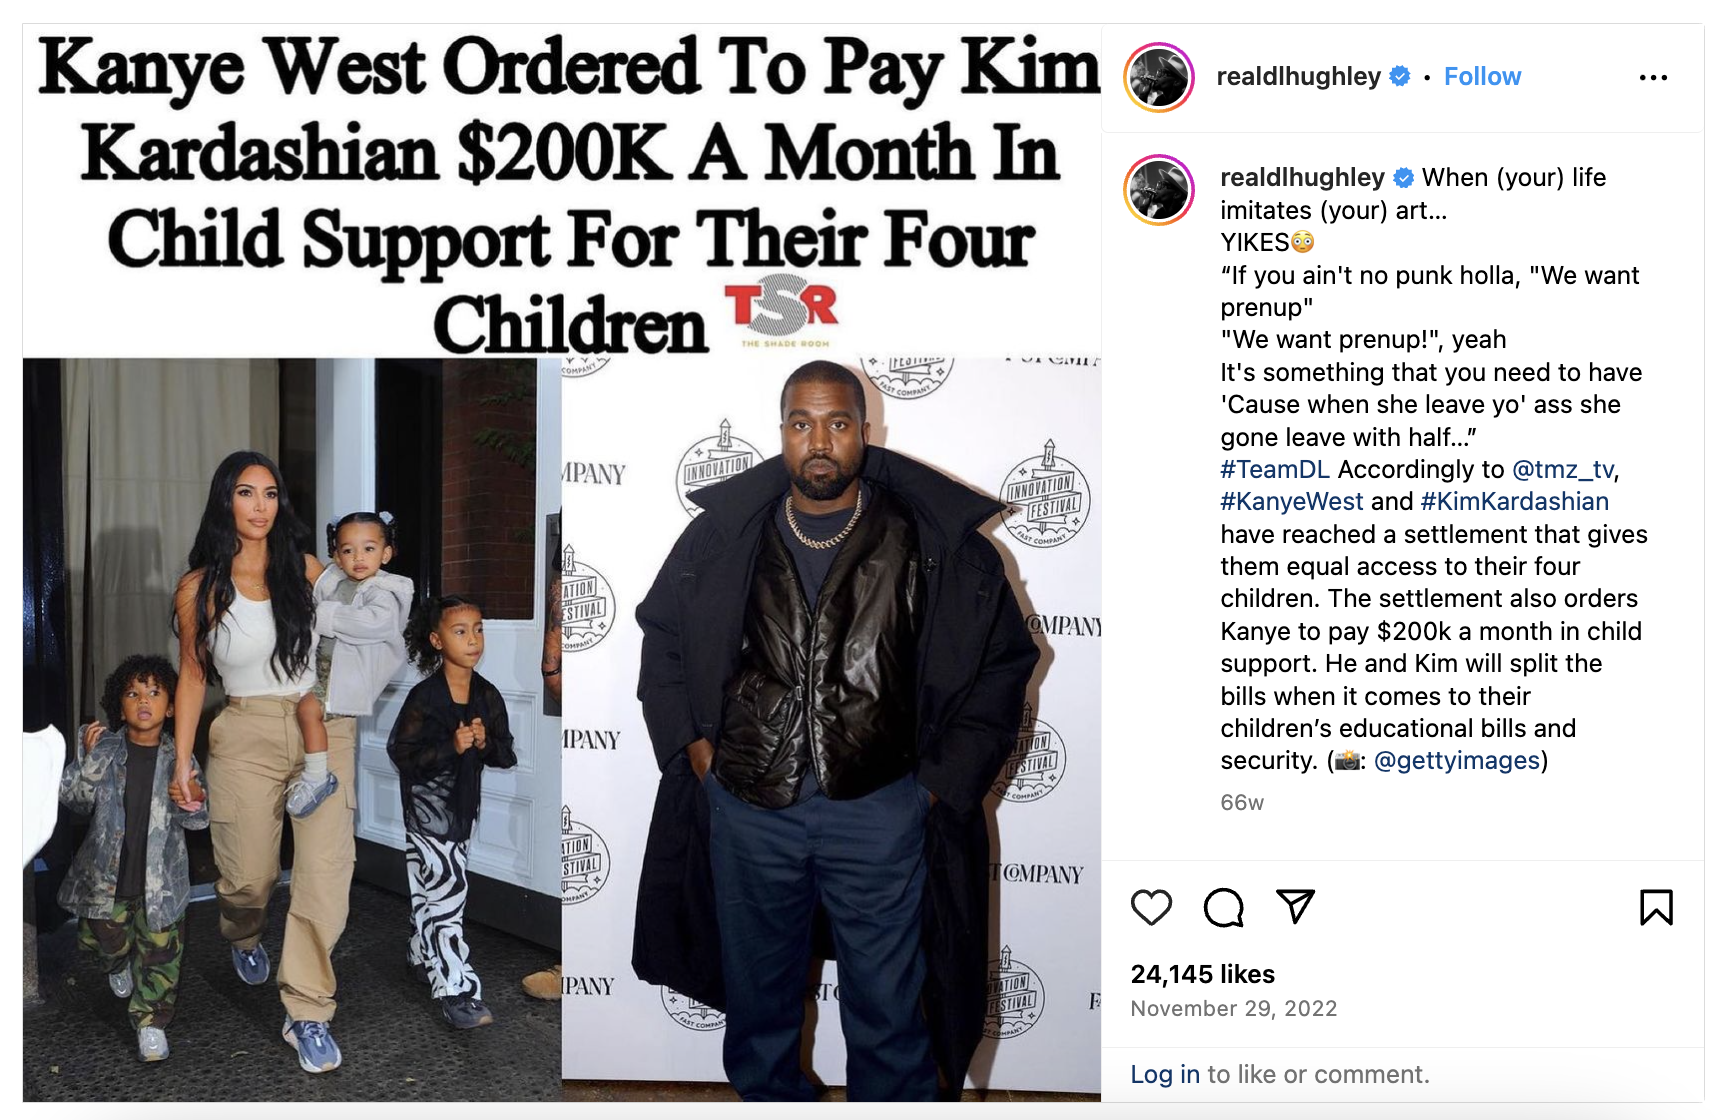 Article summary on Kanye West&#x27;s child support agreement details with a photo of Kim Kardashian with their children